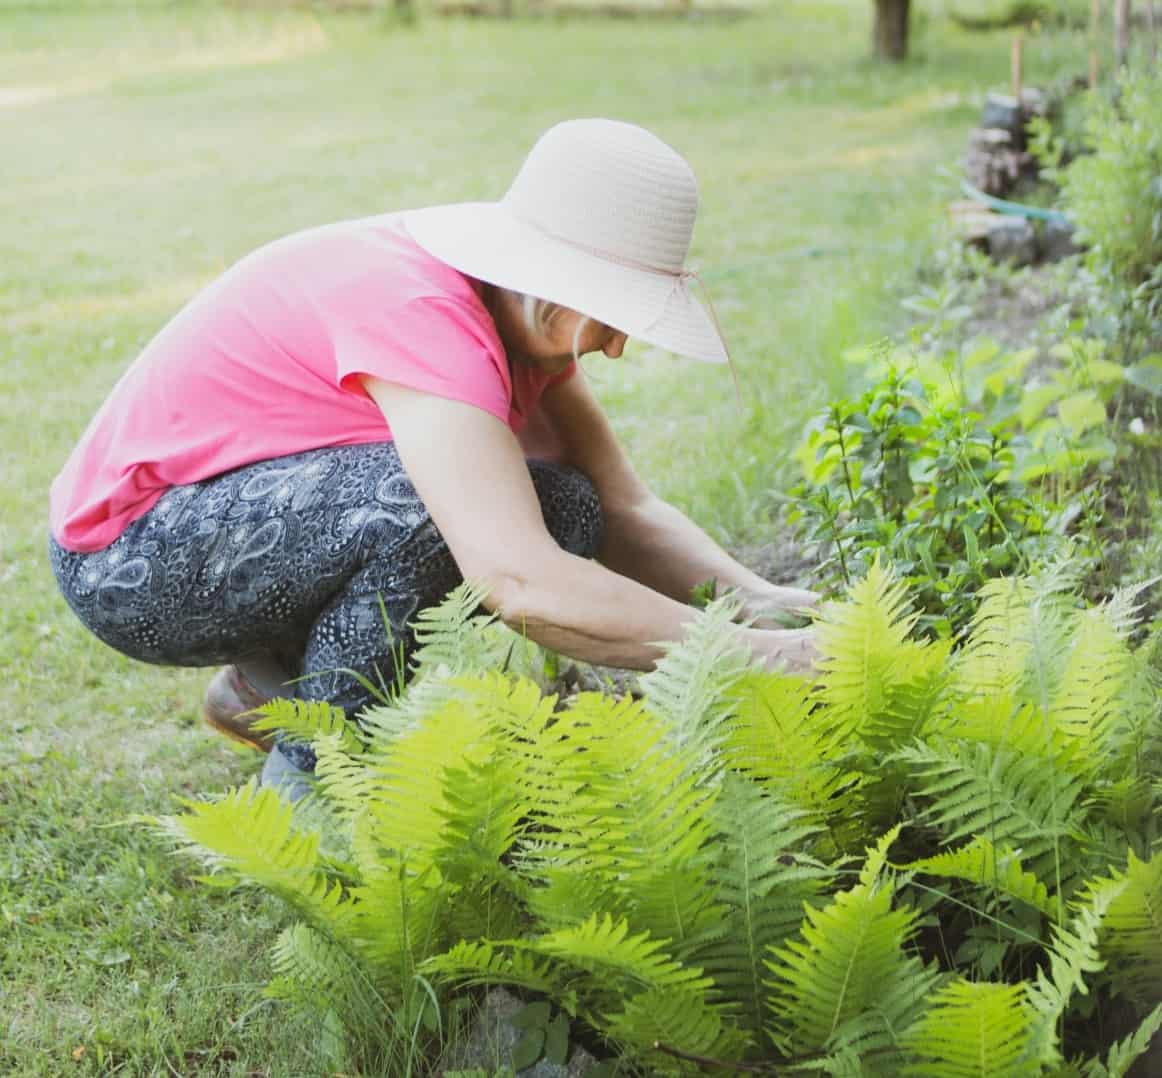 An older woman wearing a gardening hat is tending to her plants outside.